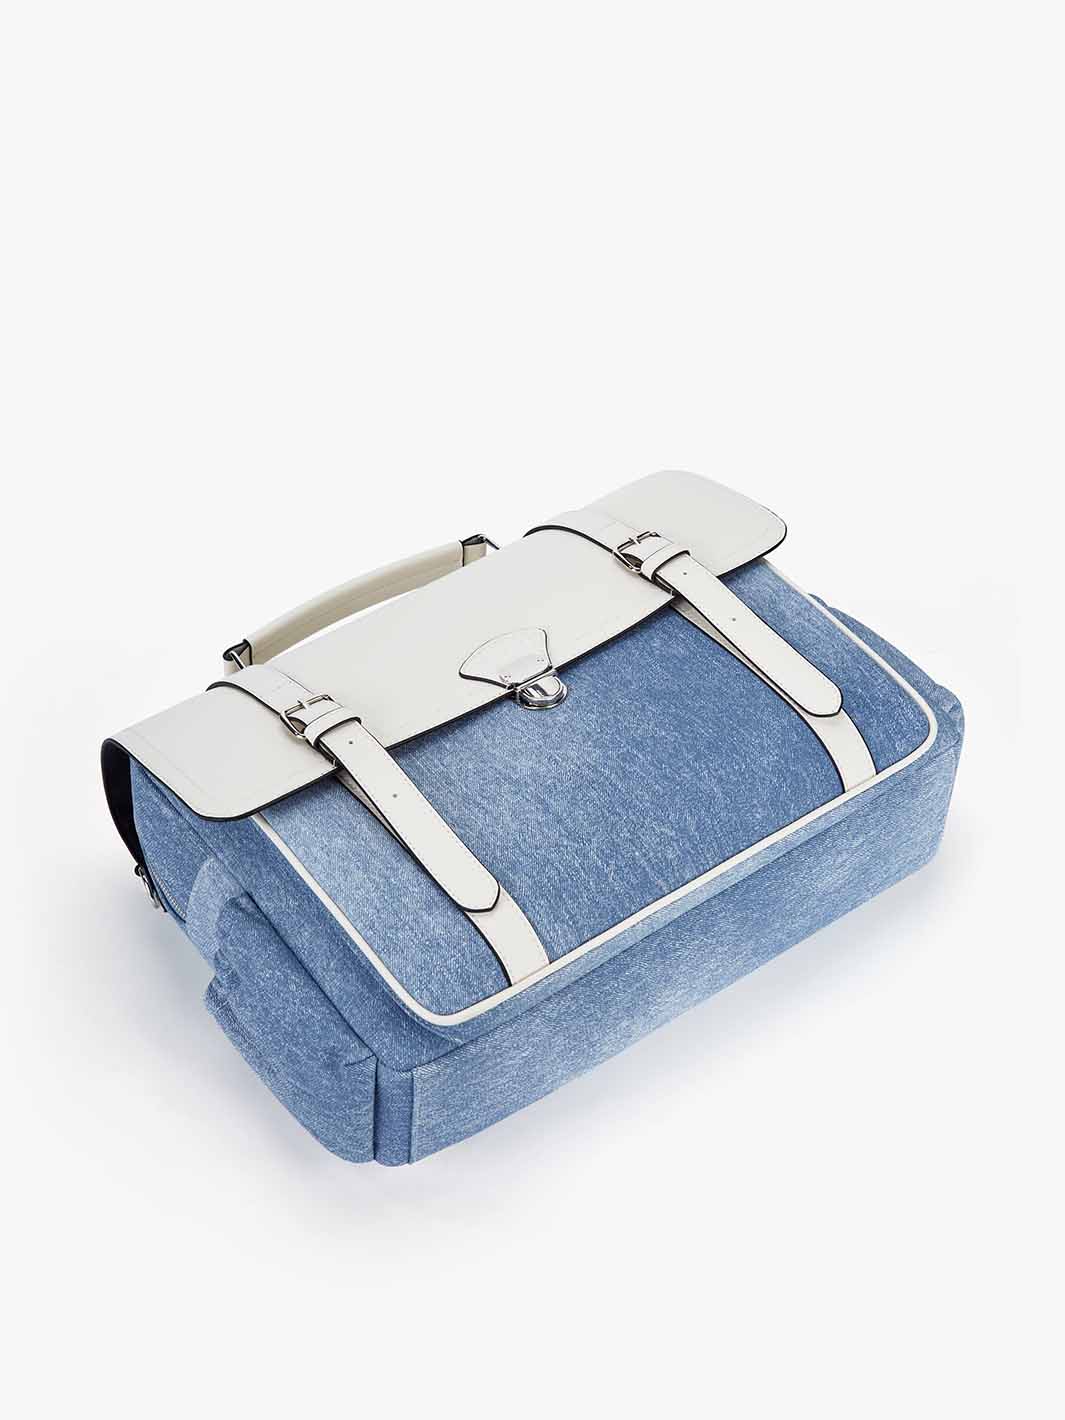 Women's Laptop Briefcase Tote with Denim-Inspired